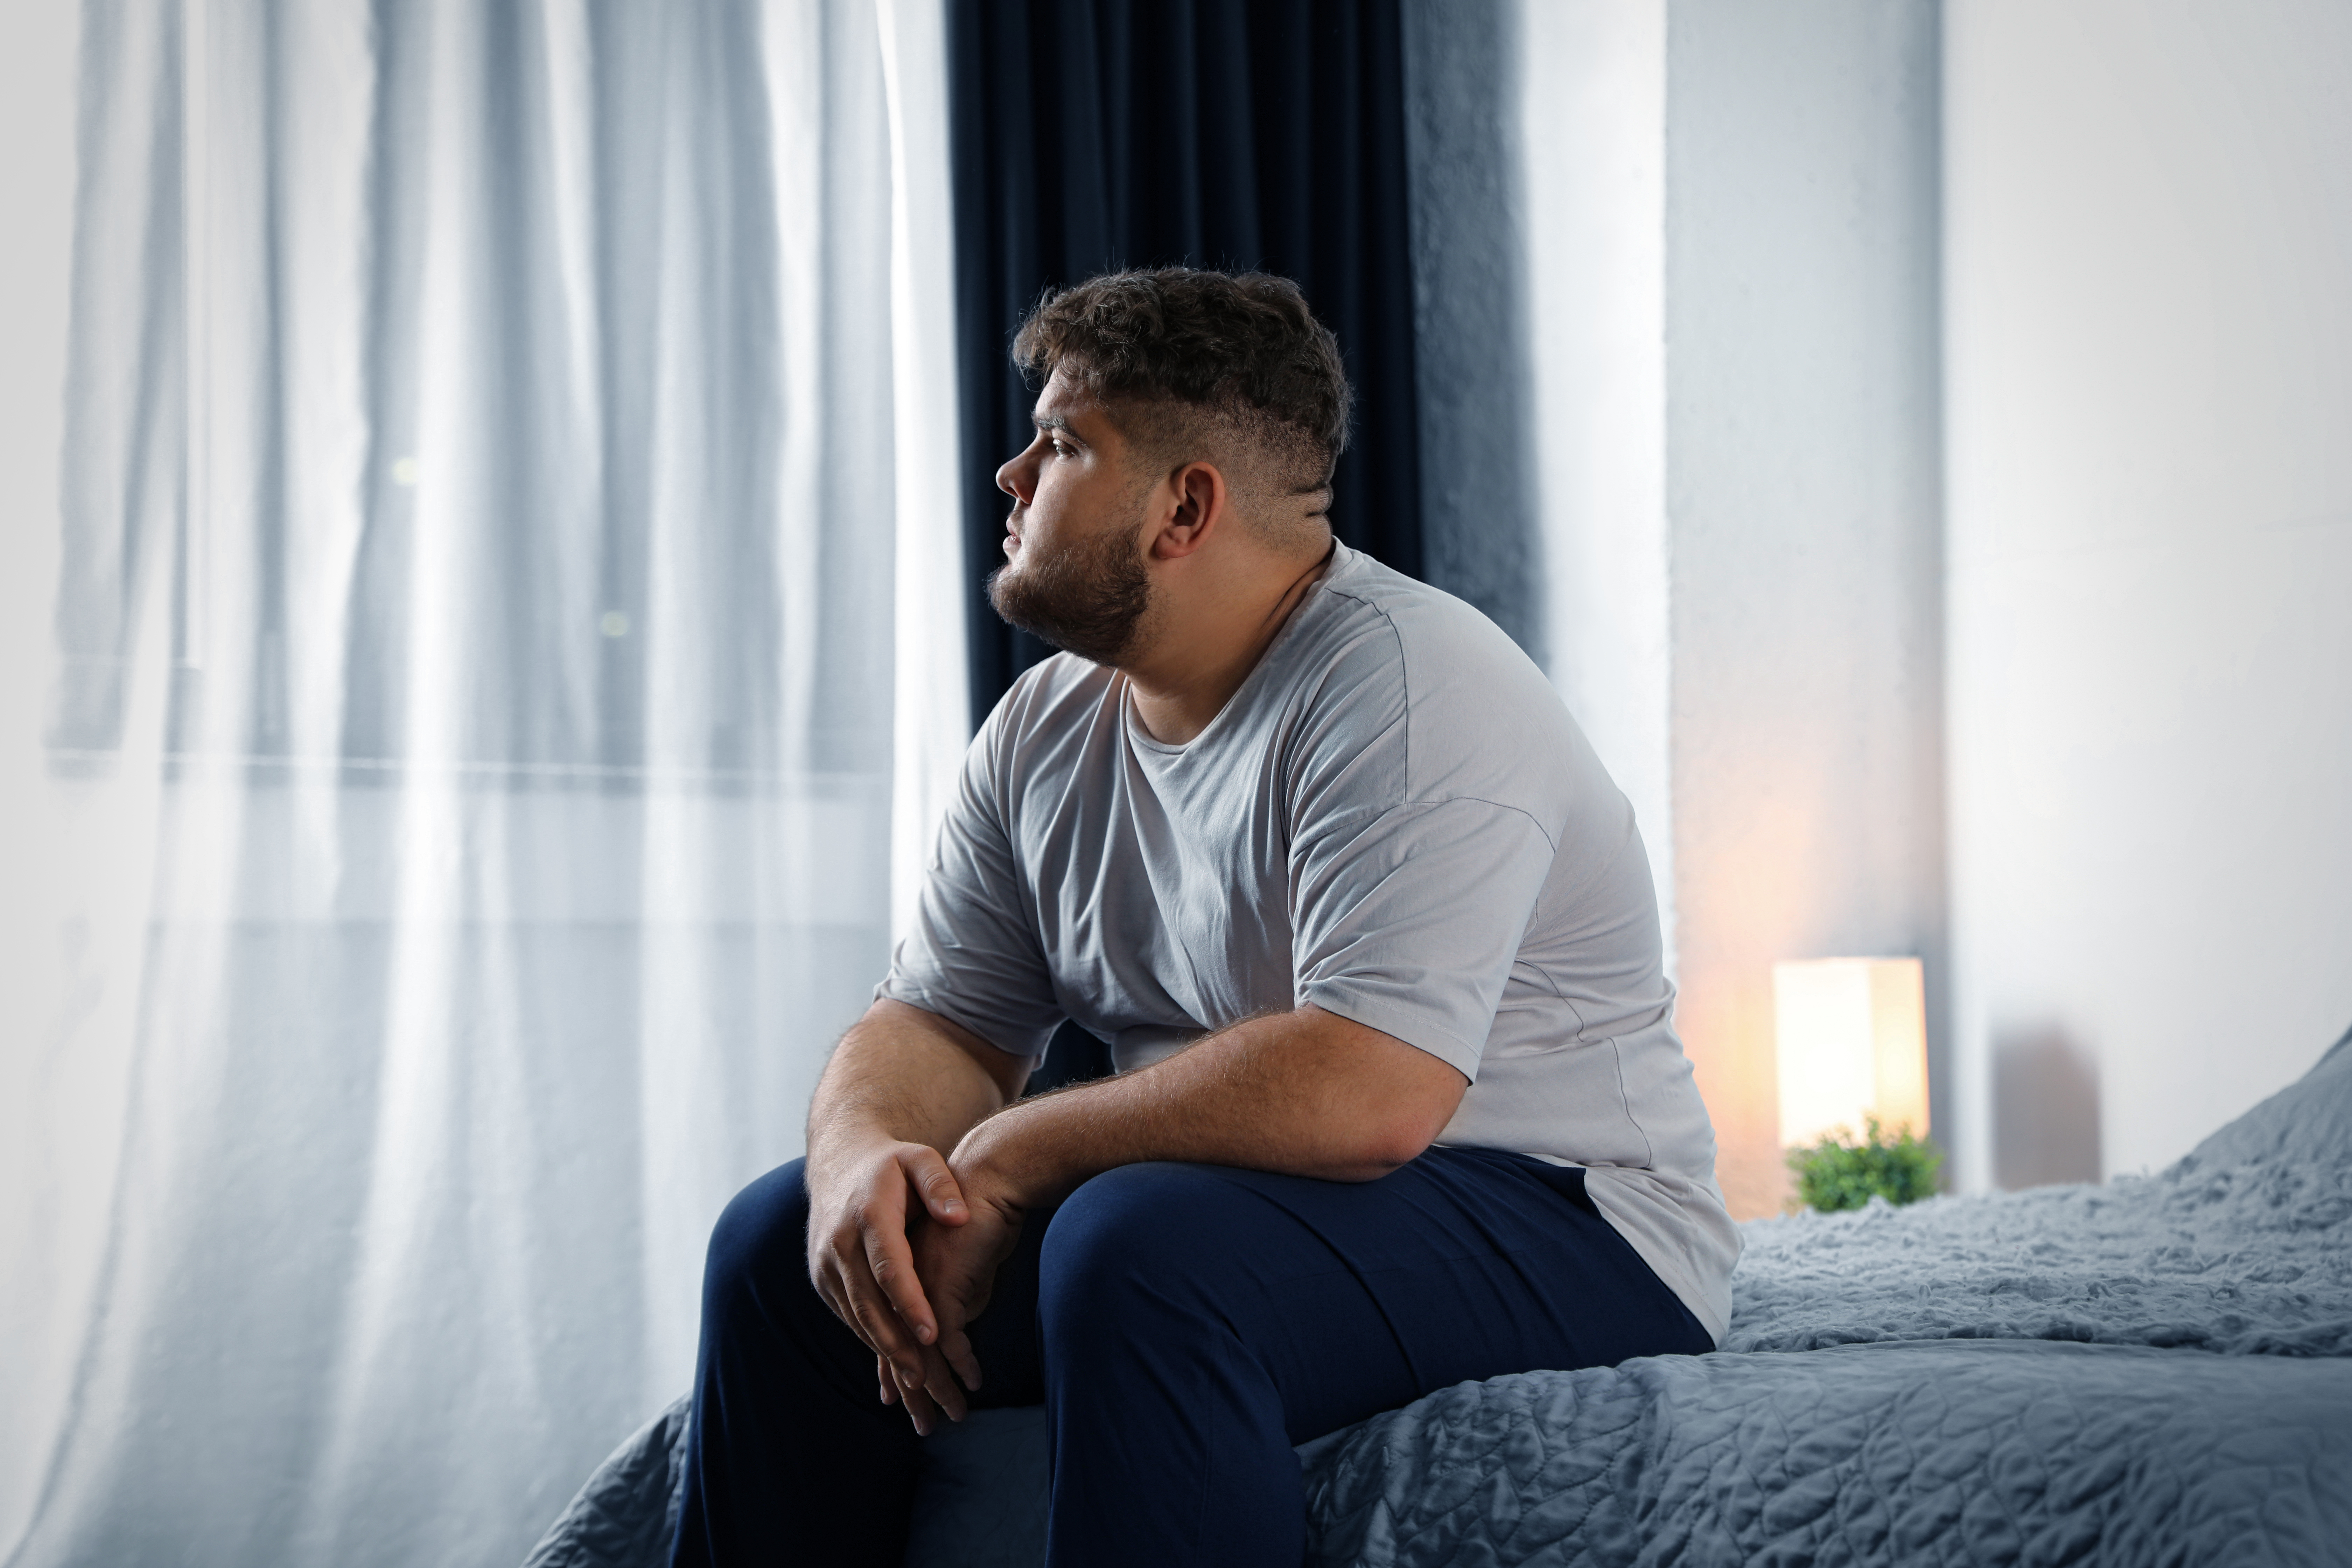 A depressed, overweight man is pictured sitting on his bed at home | Source: Shutterstock